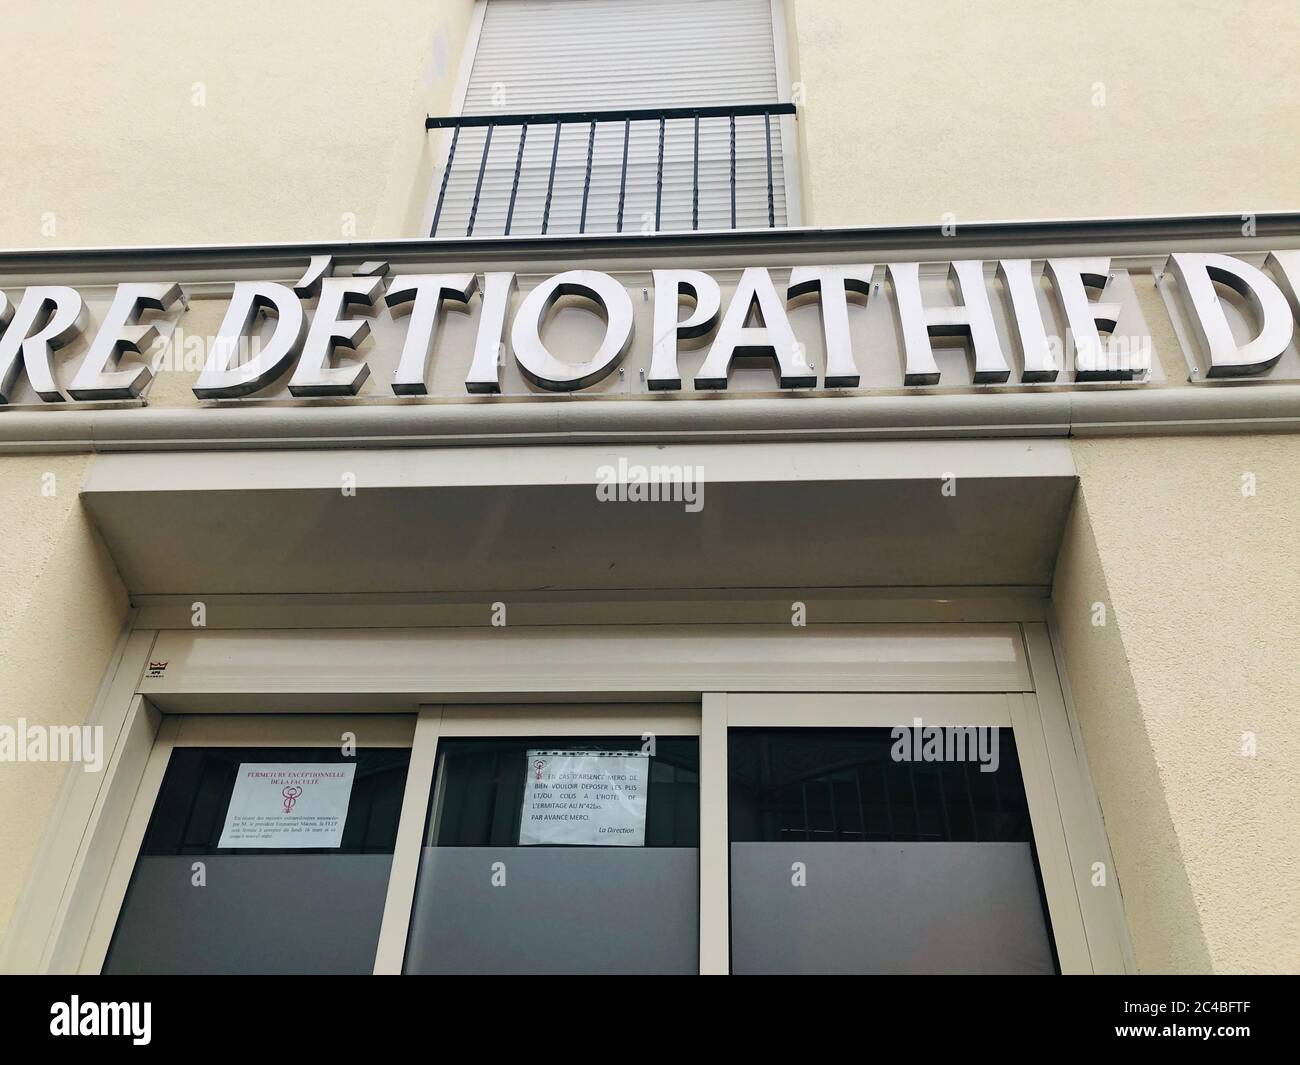 School of etiopathy, soft medicine close to osteopathy and chiropractic. Stock Photo